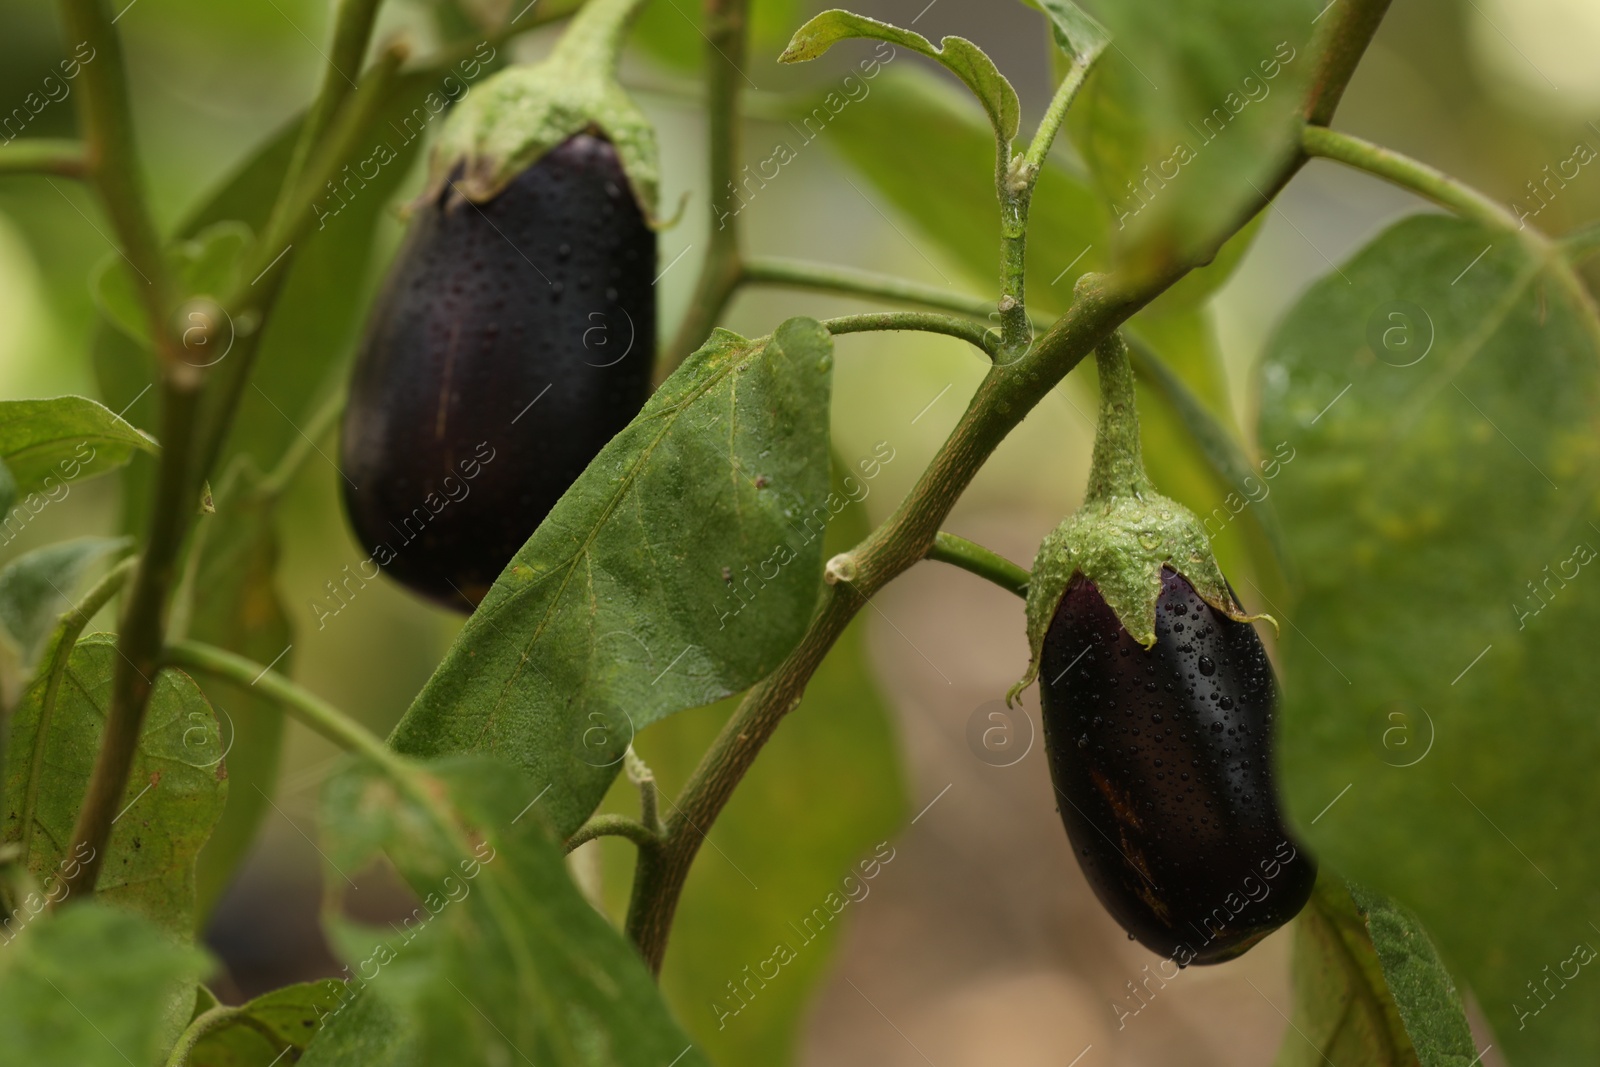 Photo of Two ripe eggplants with water drops growing on stem outdoors